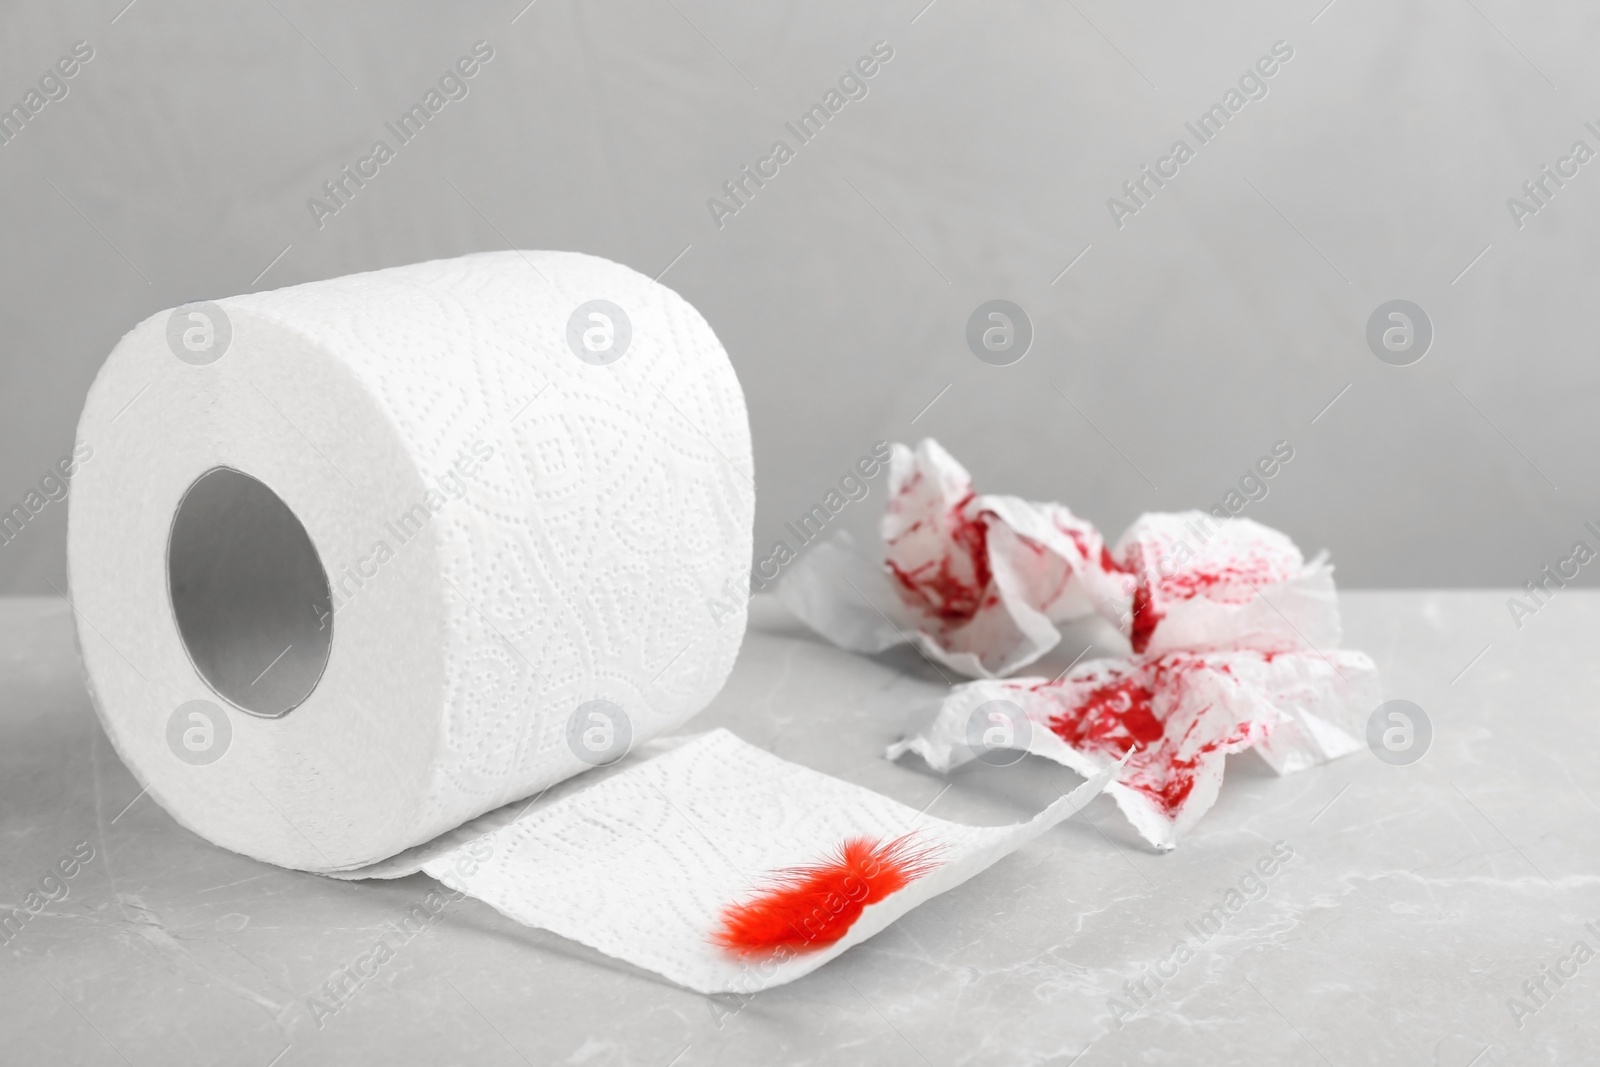 Photo of Roll of toilet paper and red feather on table. Hemorrhoid problems